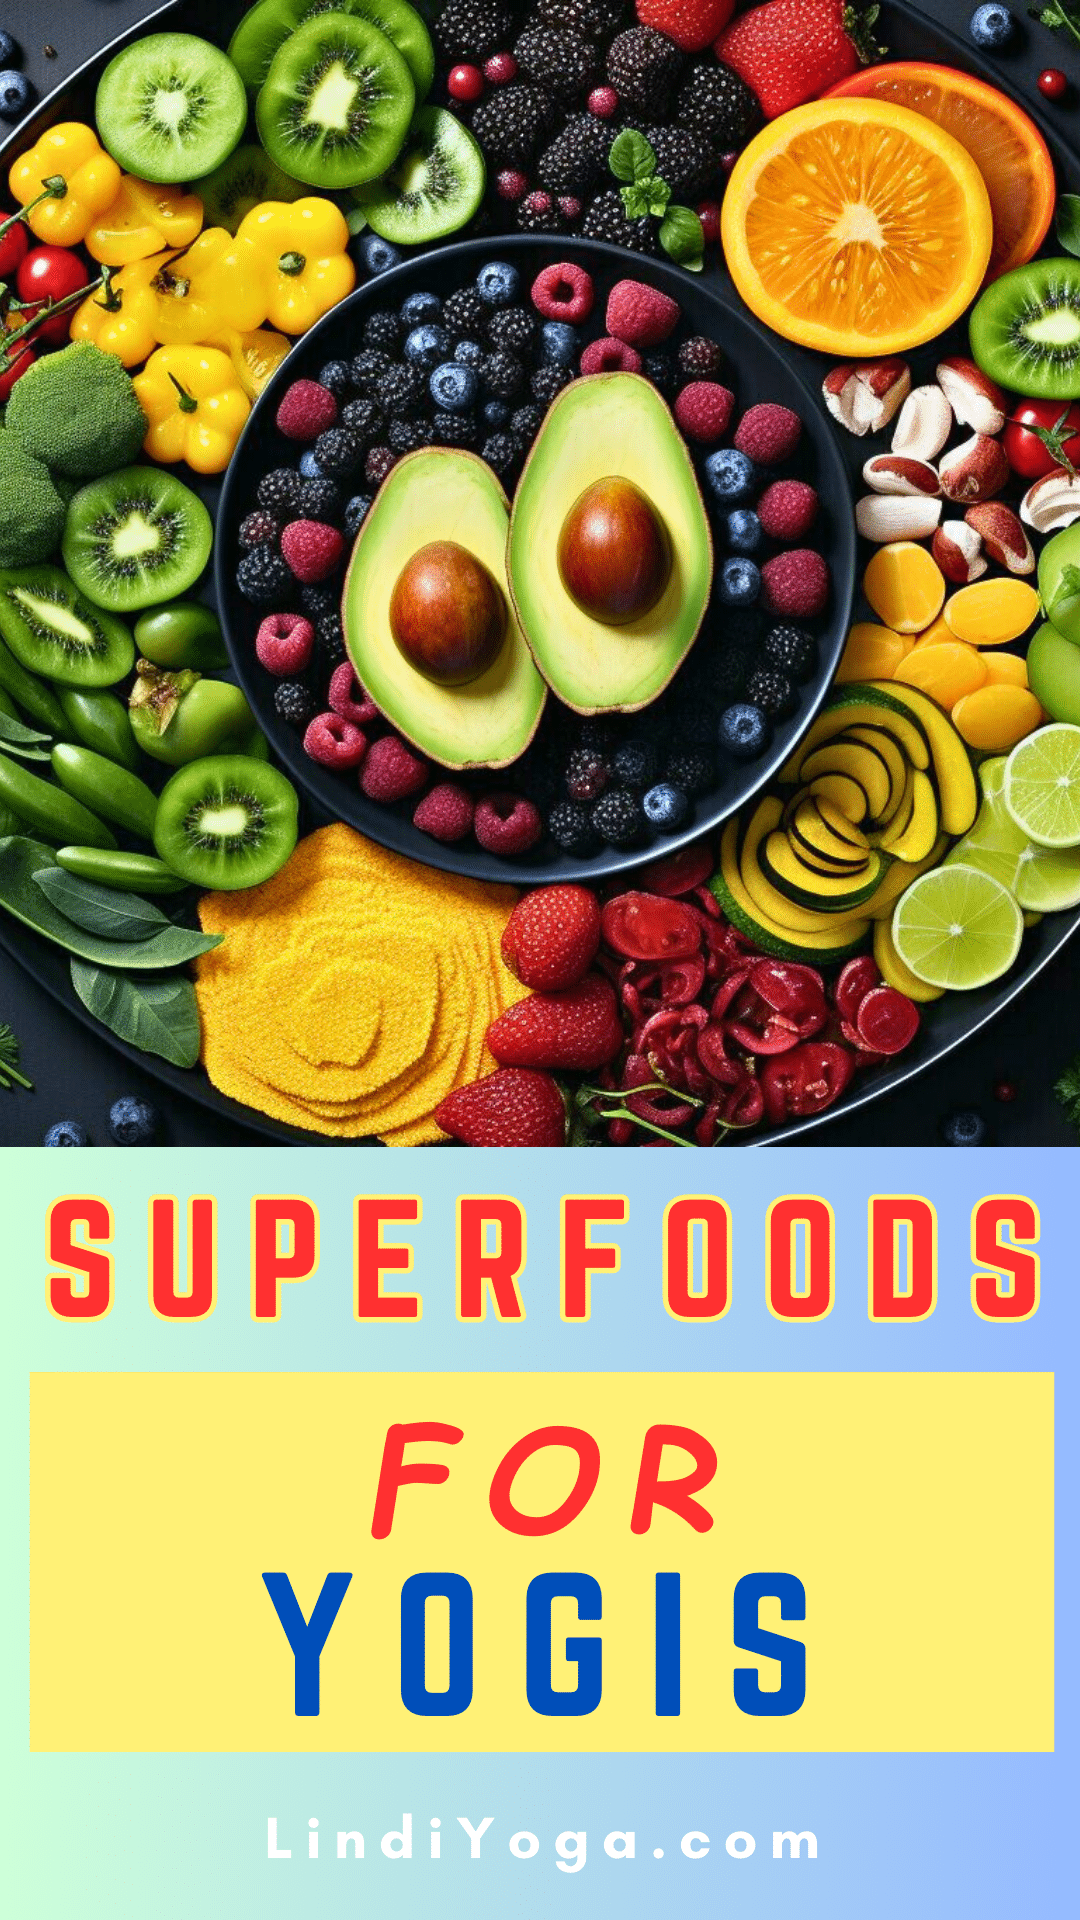 Superfoods for Yogis / Canva